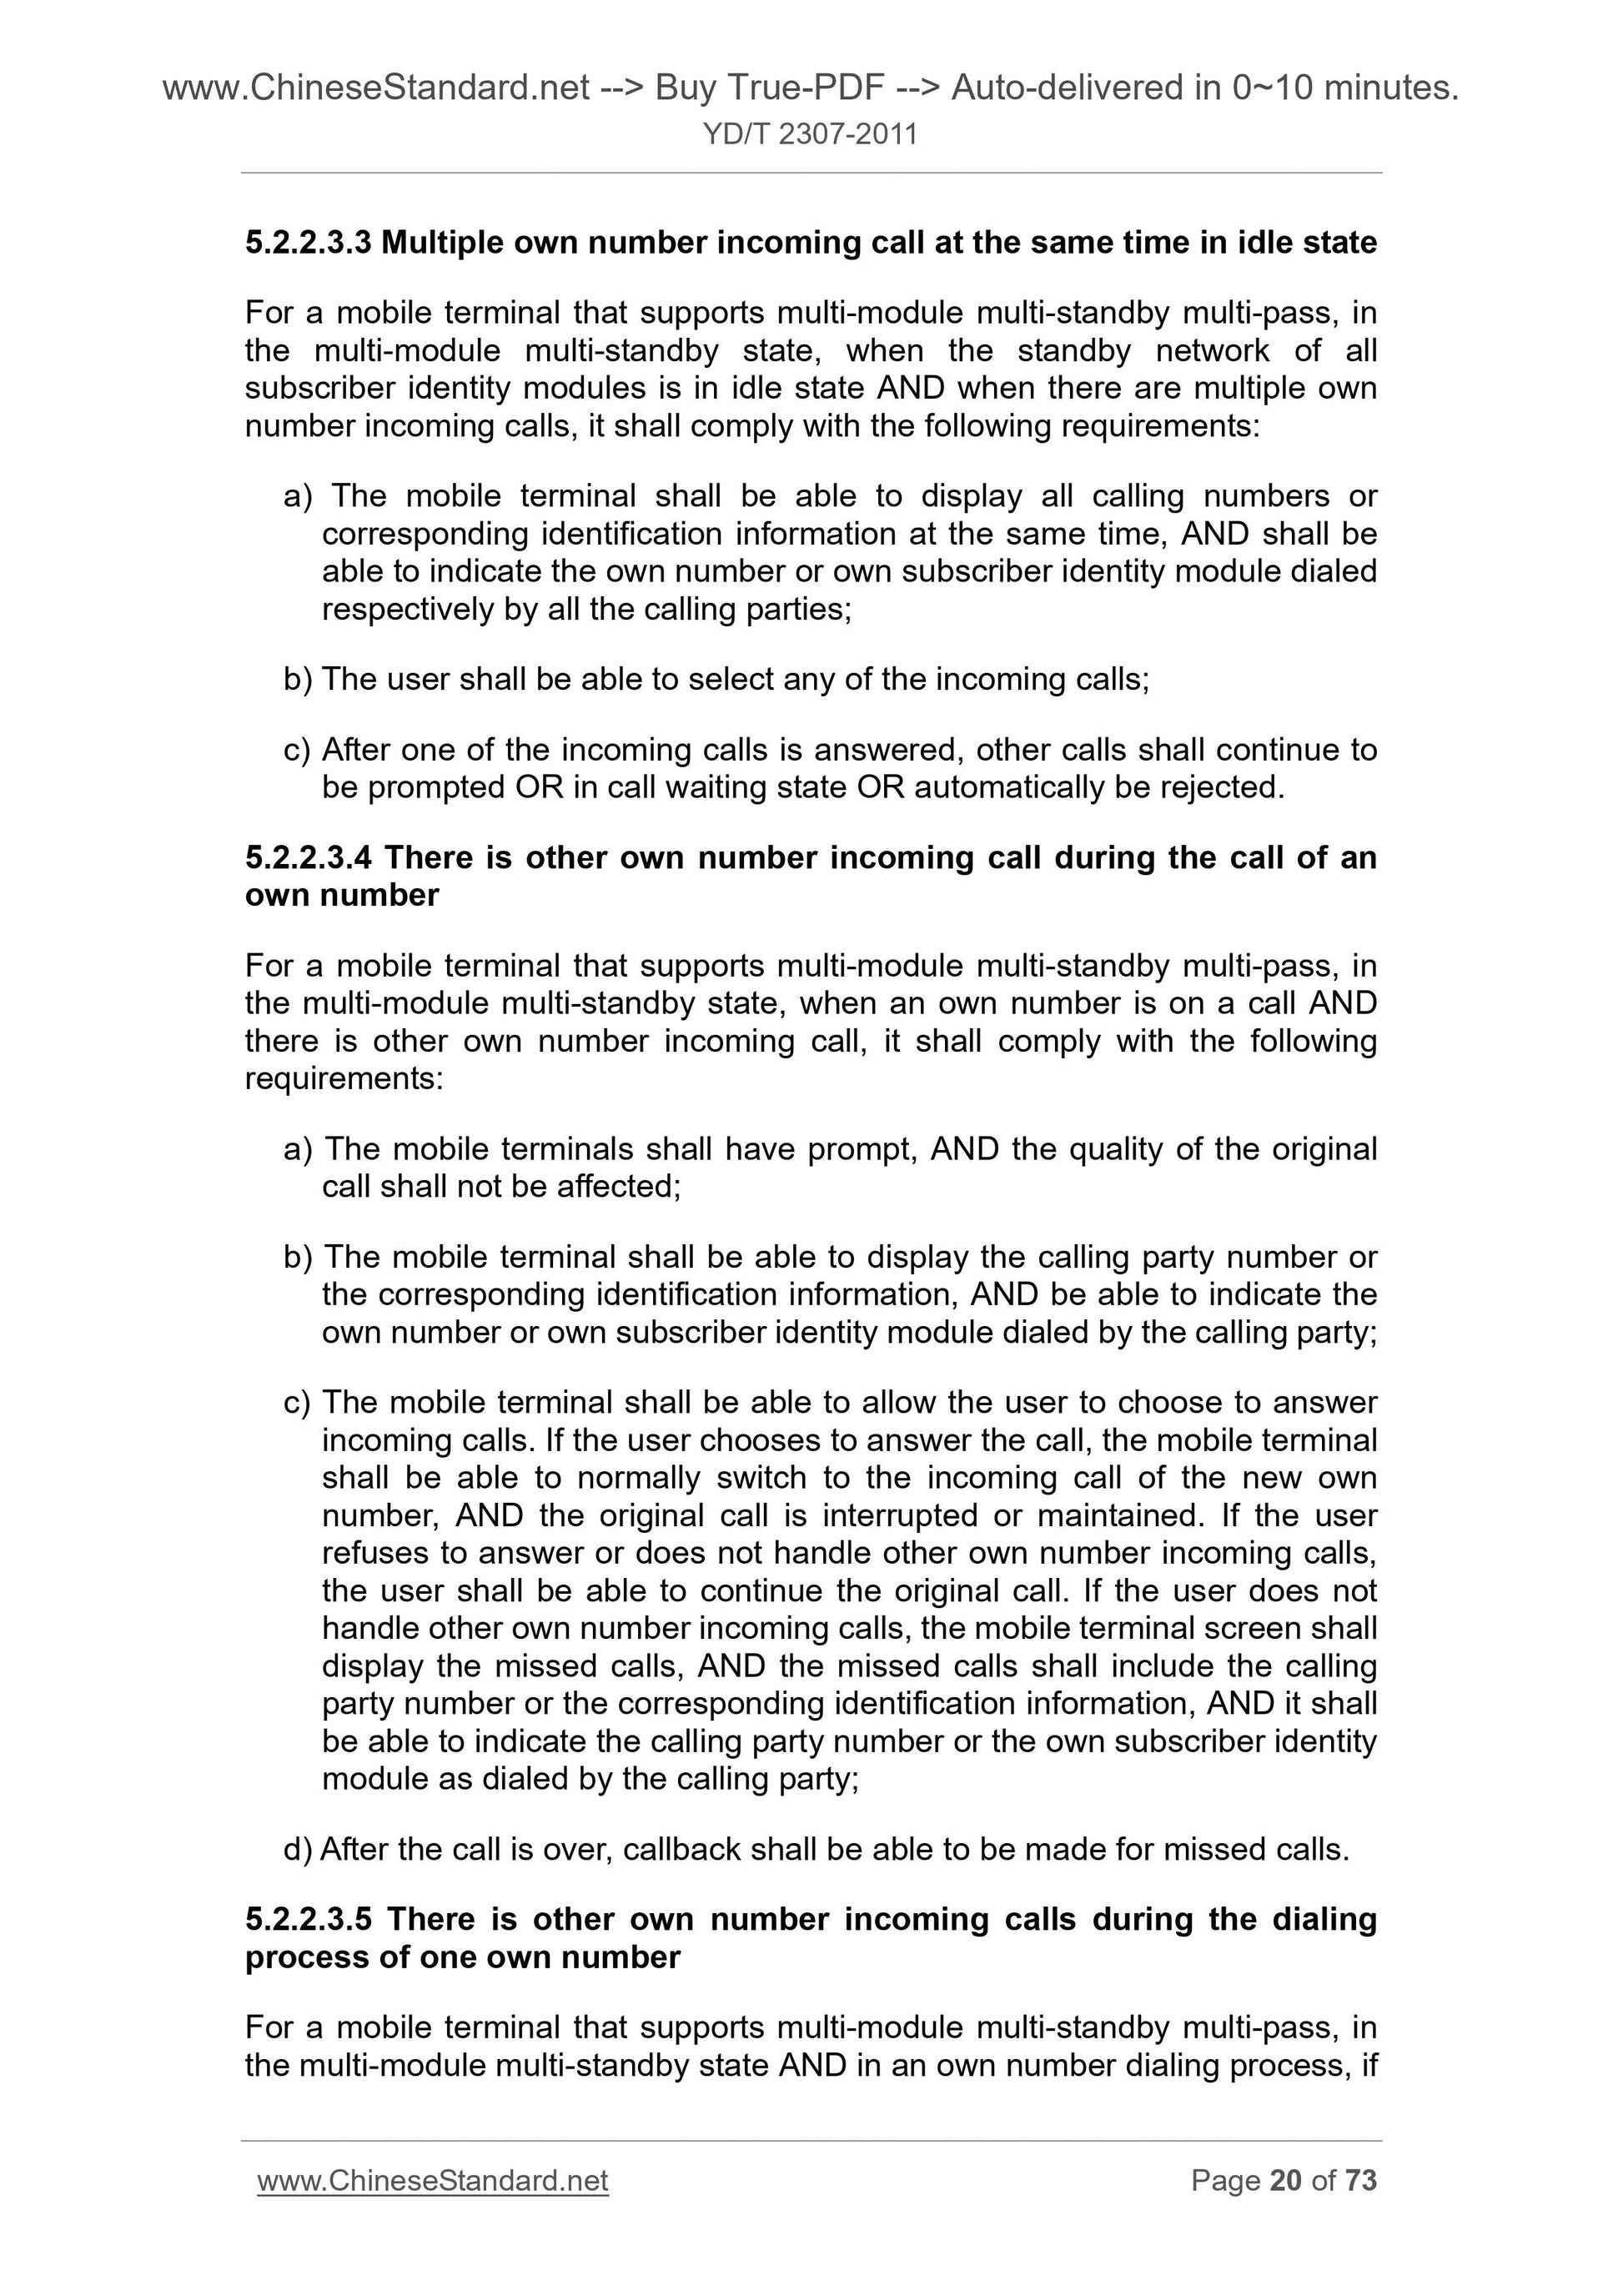 YD/T 2307-2011 Page 10